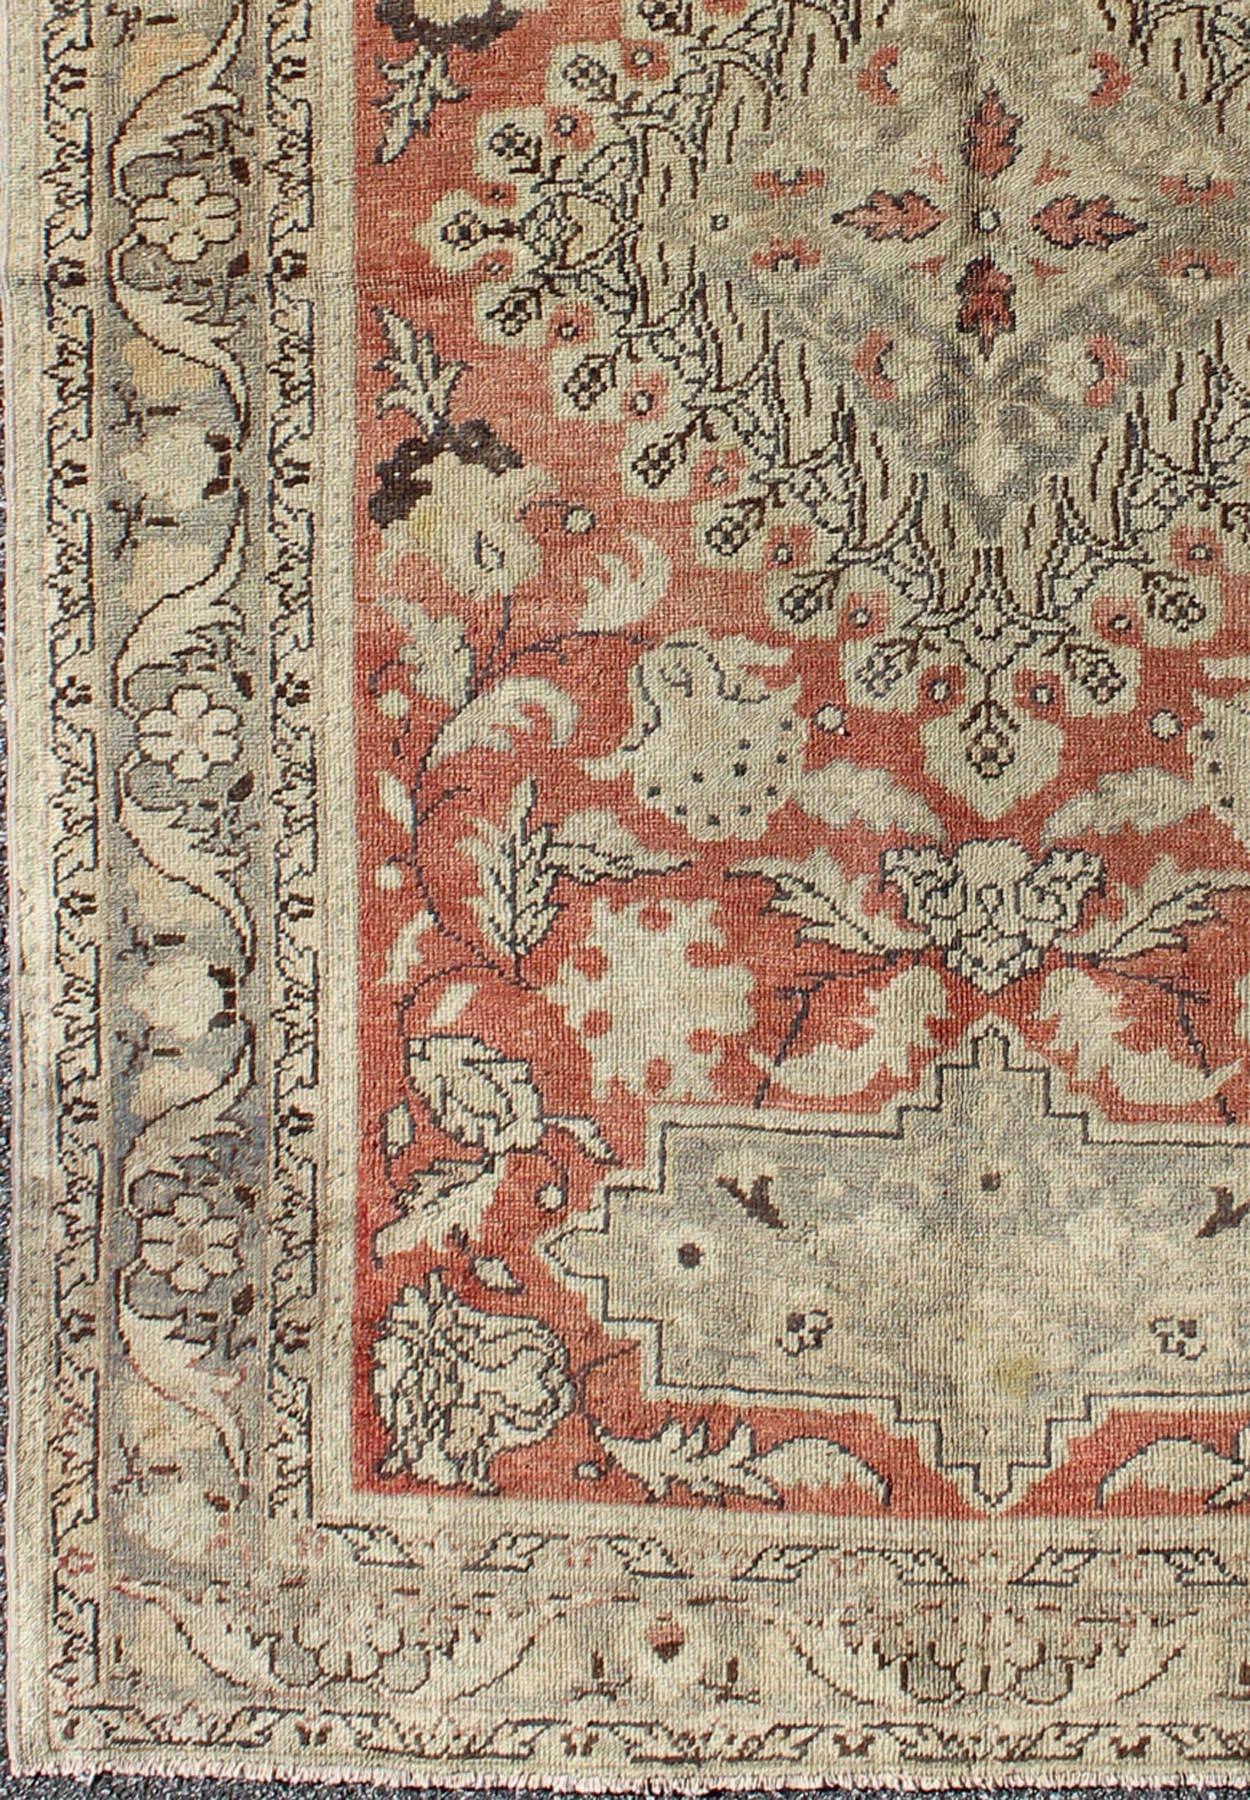 This fine Turkish Oushak carpet form the 1930s boasts an impressive multi-layered, diamond-shaped central medallion. An exquisite display of stylized floral motifs complemented by a subdued palette of colors fills the body of the rug. An elegant